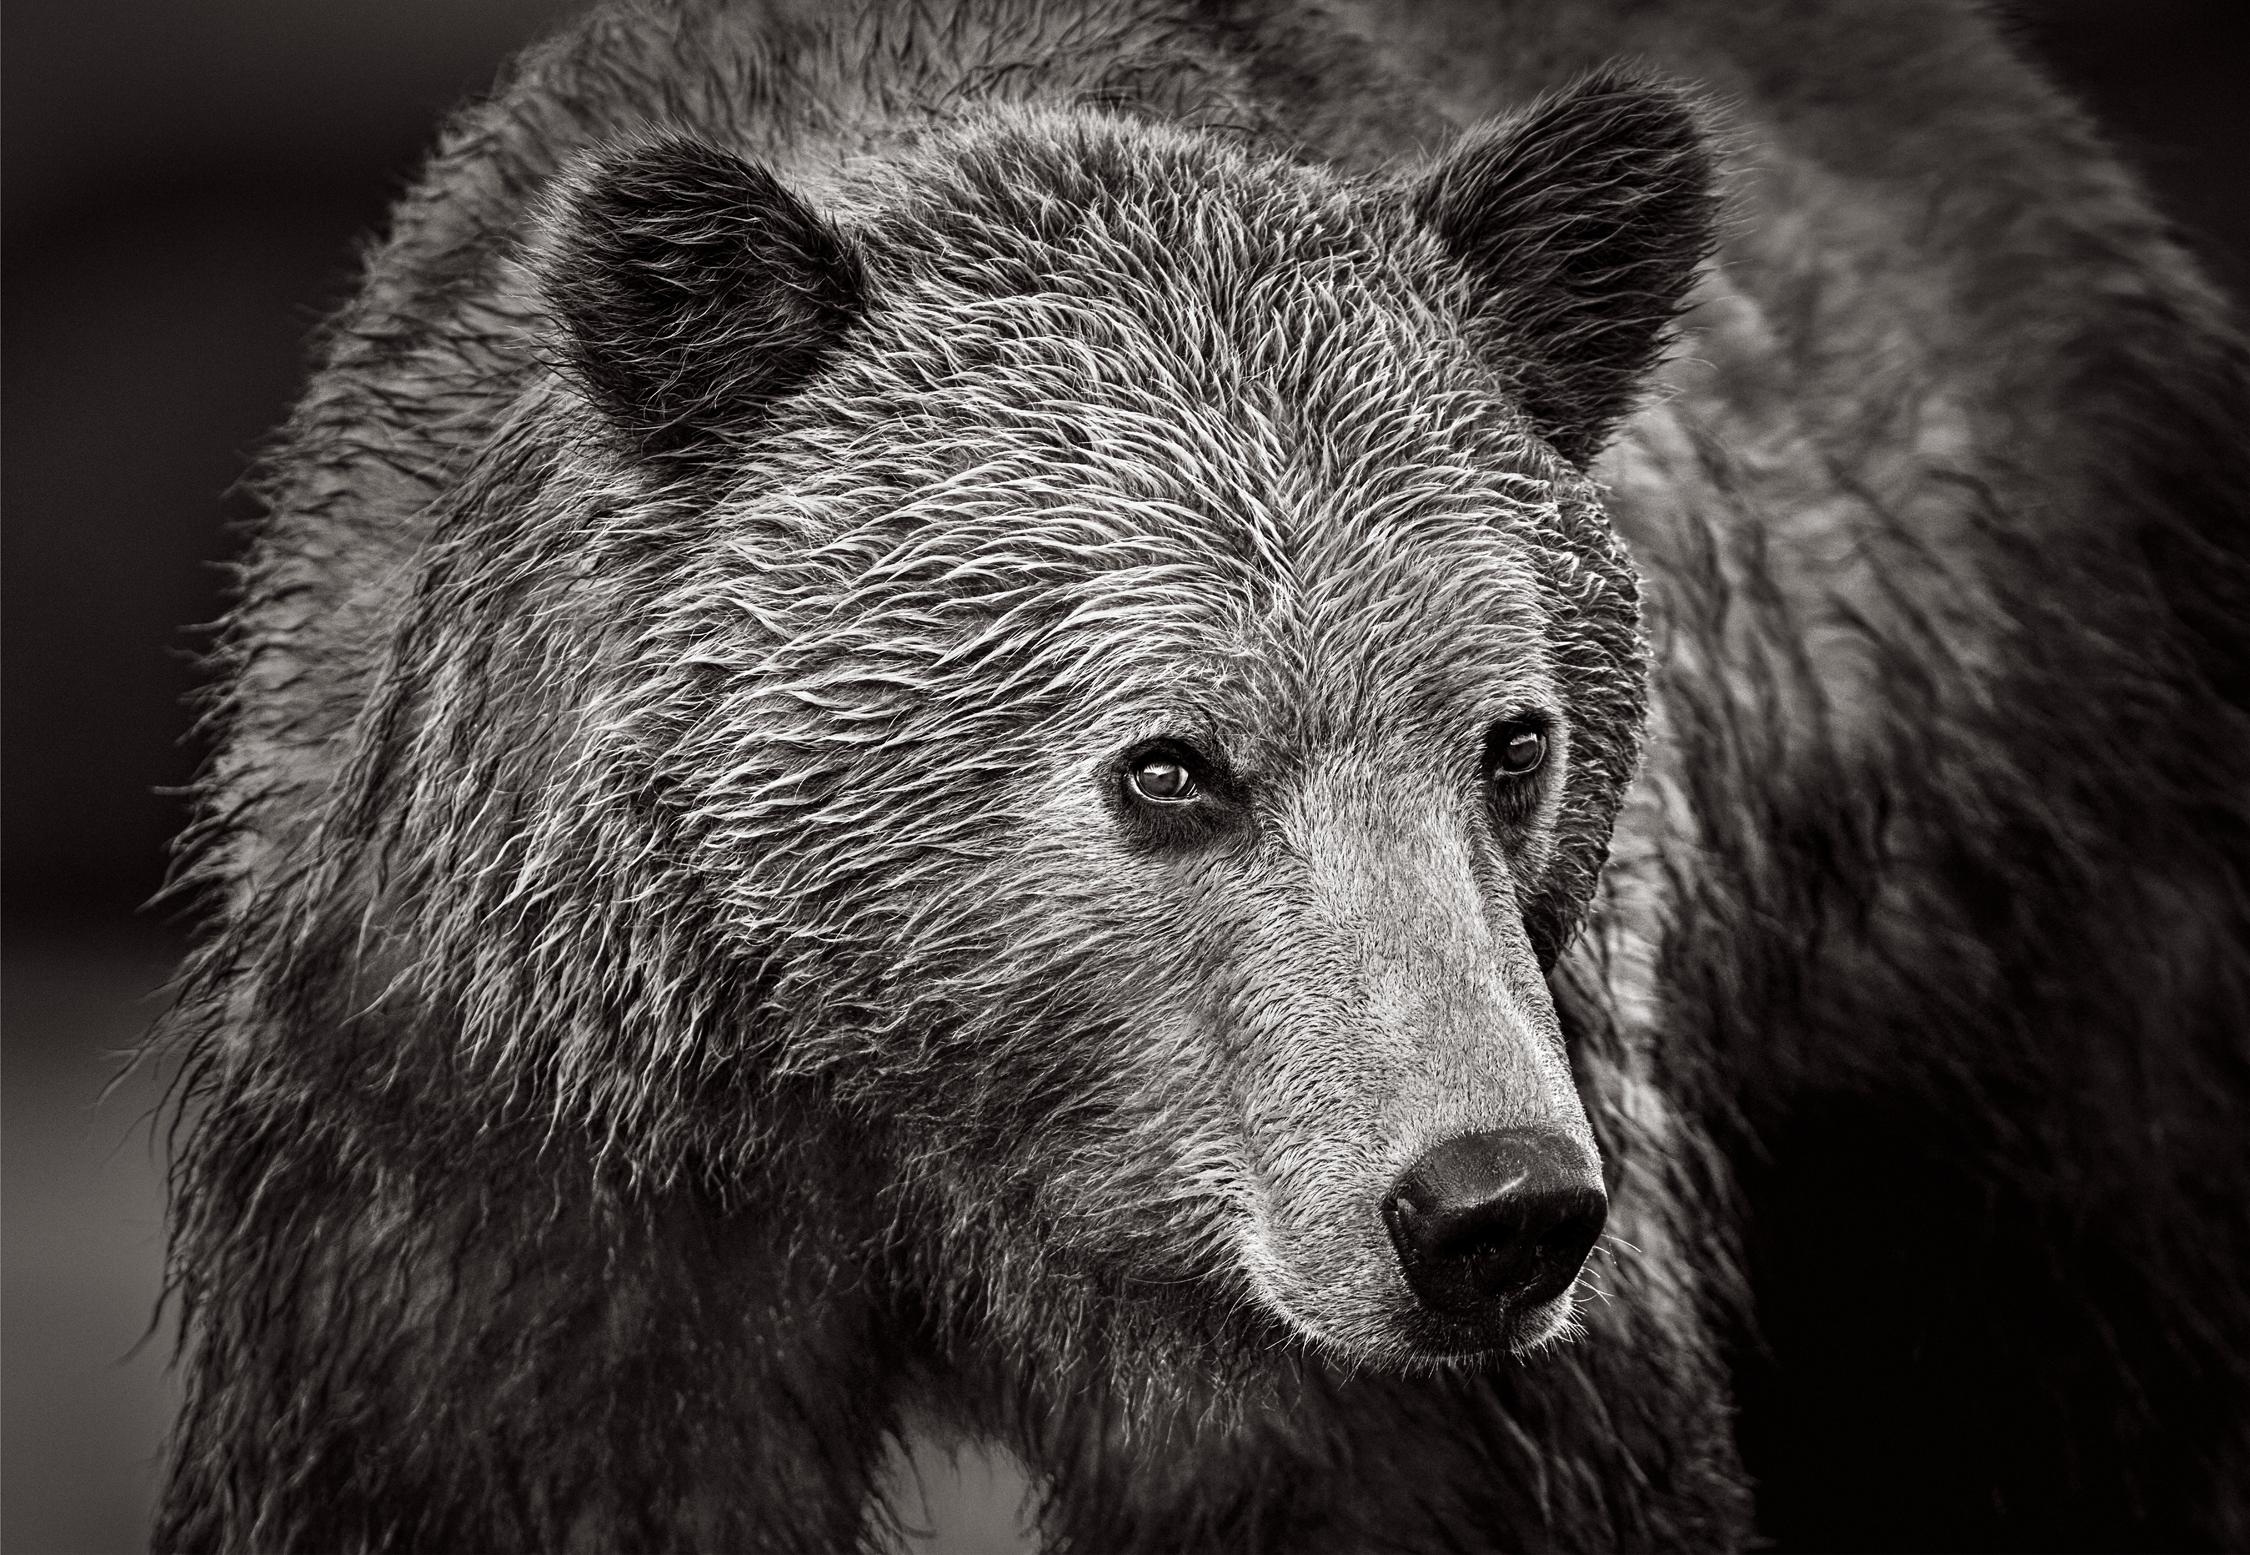 Drew Doggett Black and White Photograph - Intimate Capture Of A Brown Bear Look At Something In The Distance